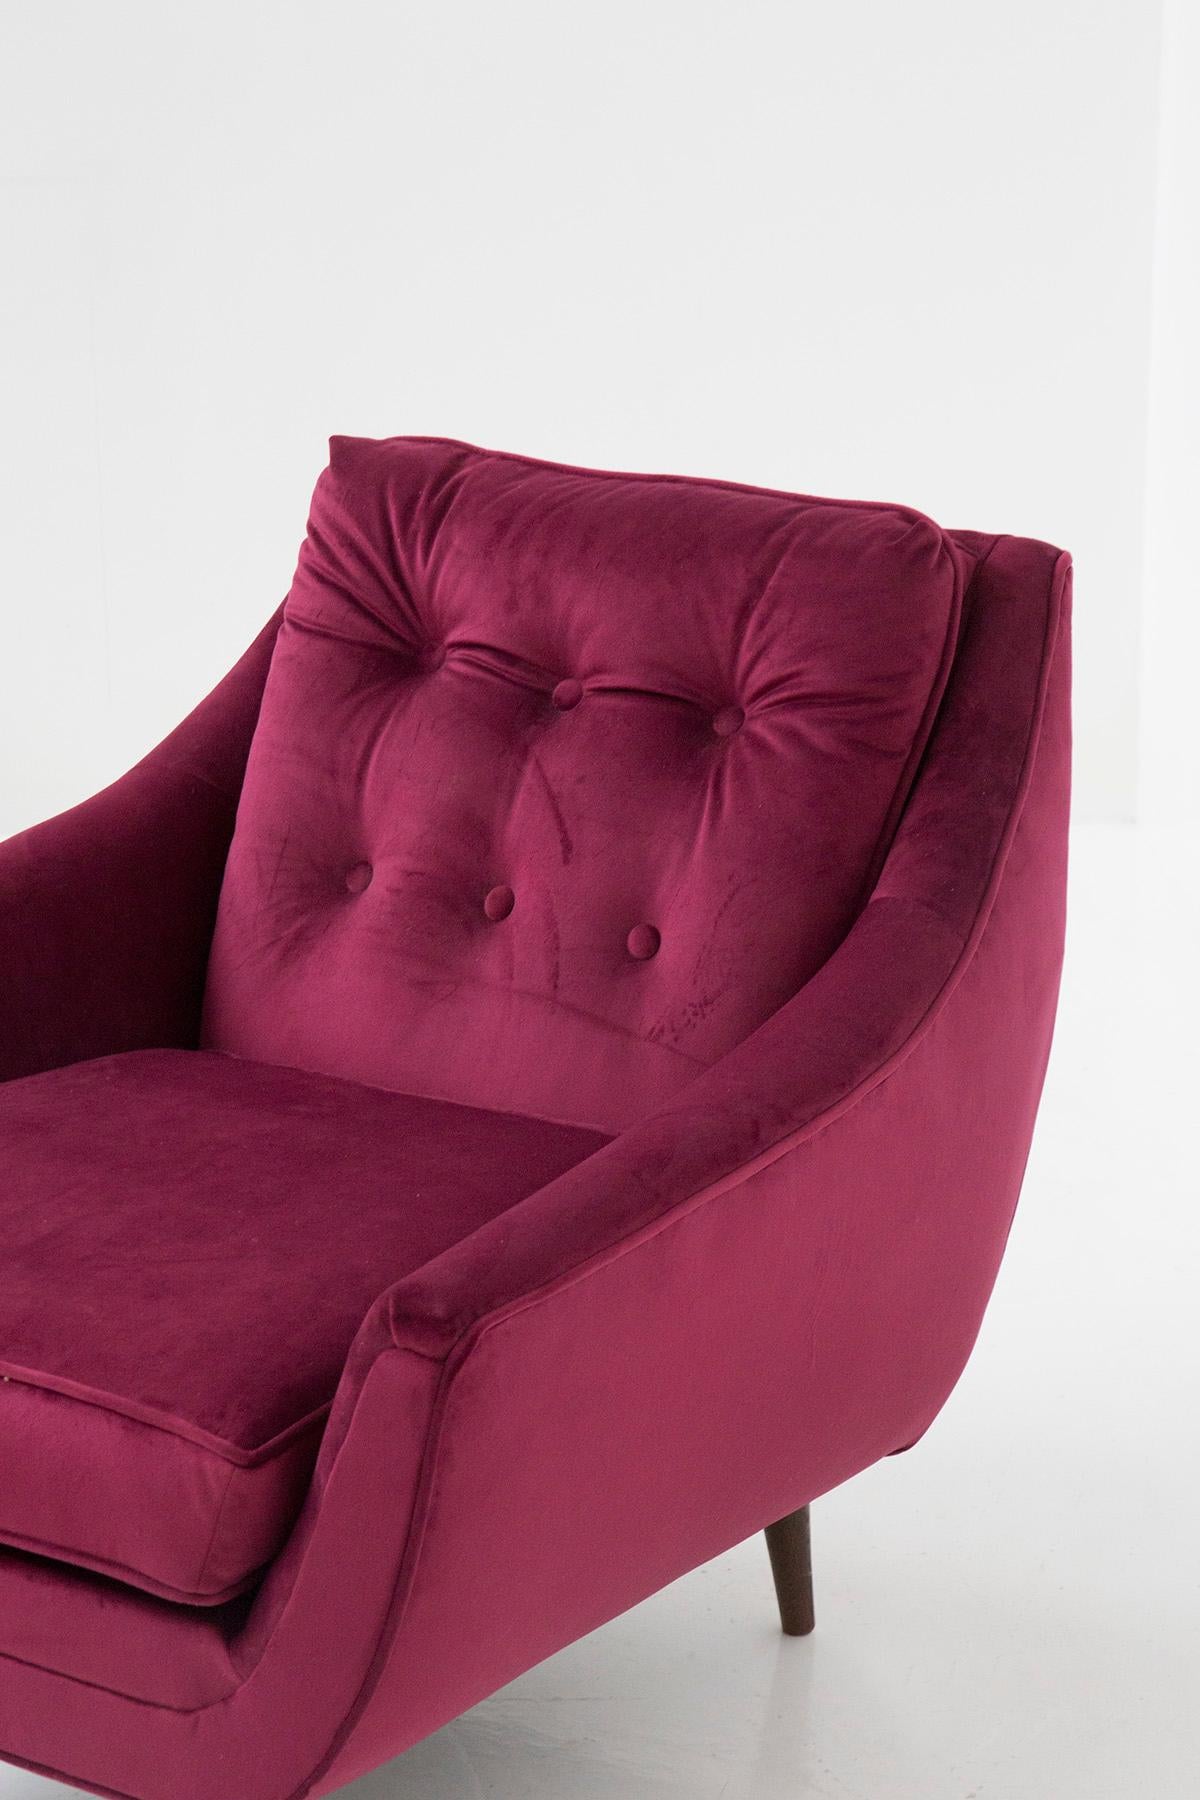 Adrian Pearsall Pair of Purple Armchairs in Velvet Him and Her For Sale 3